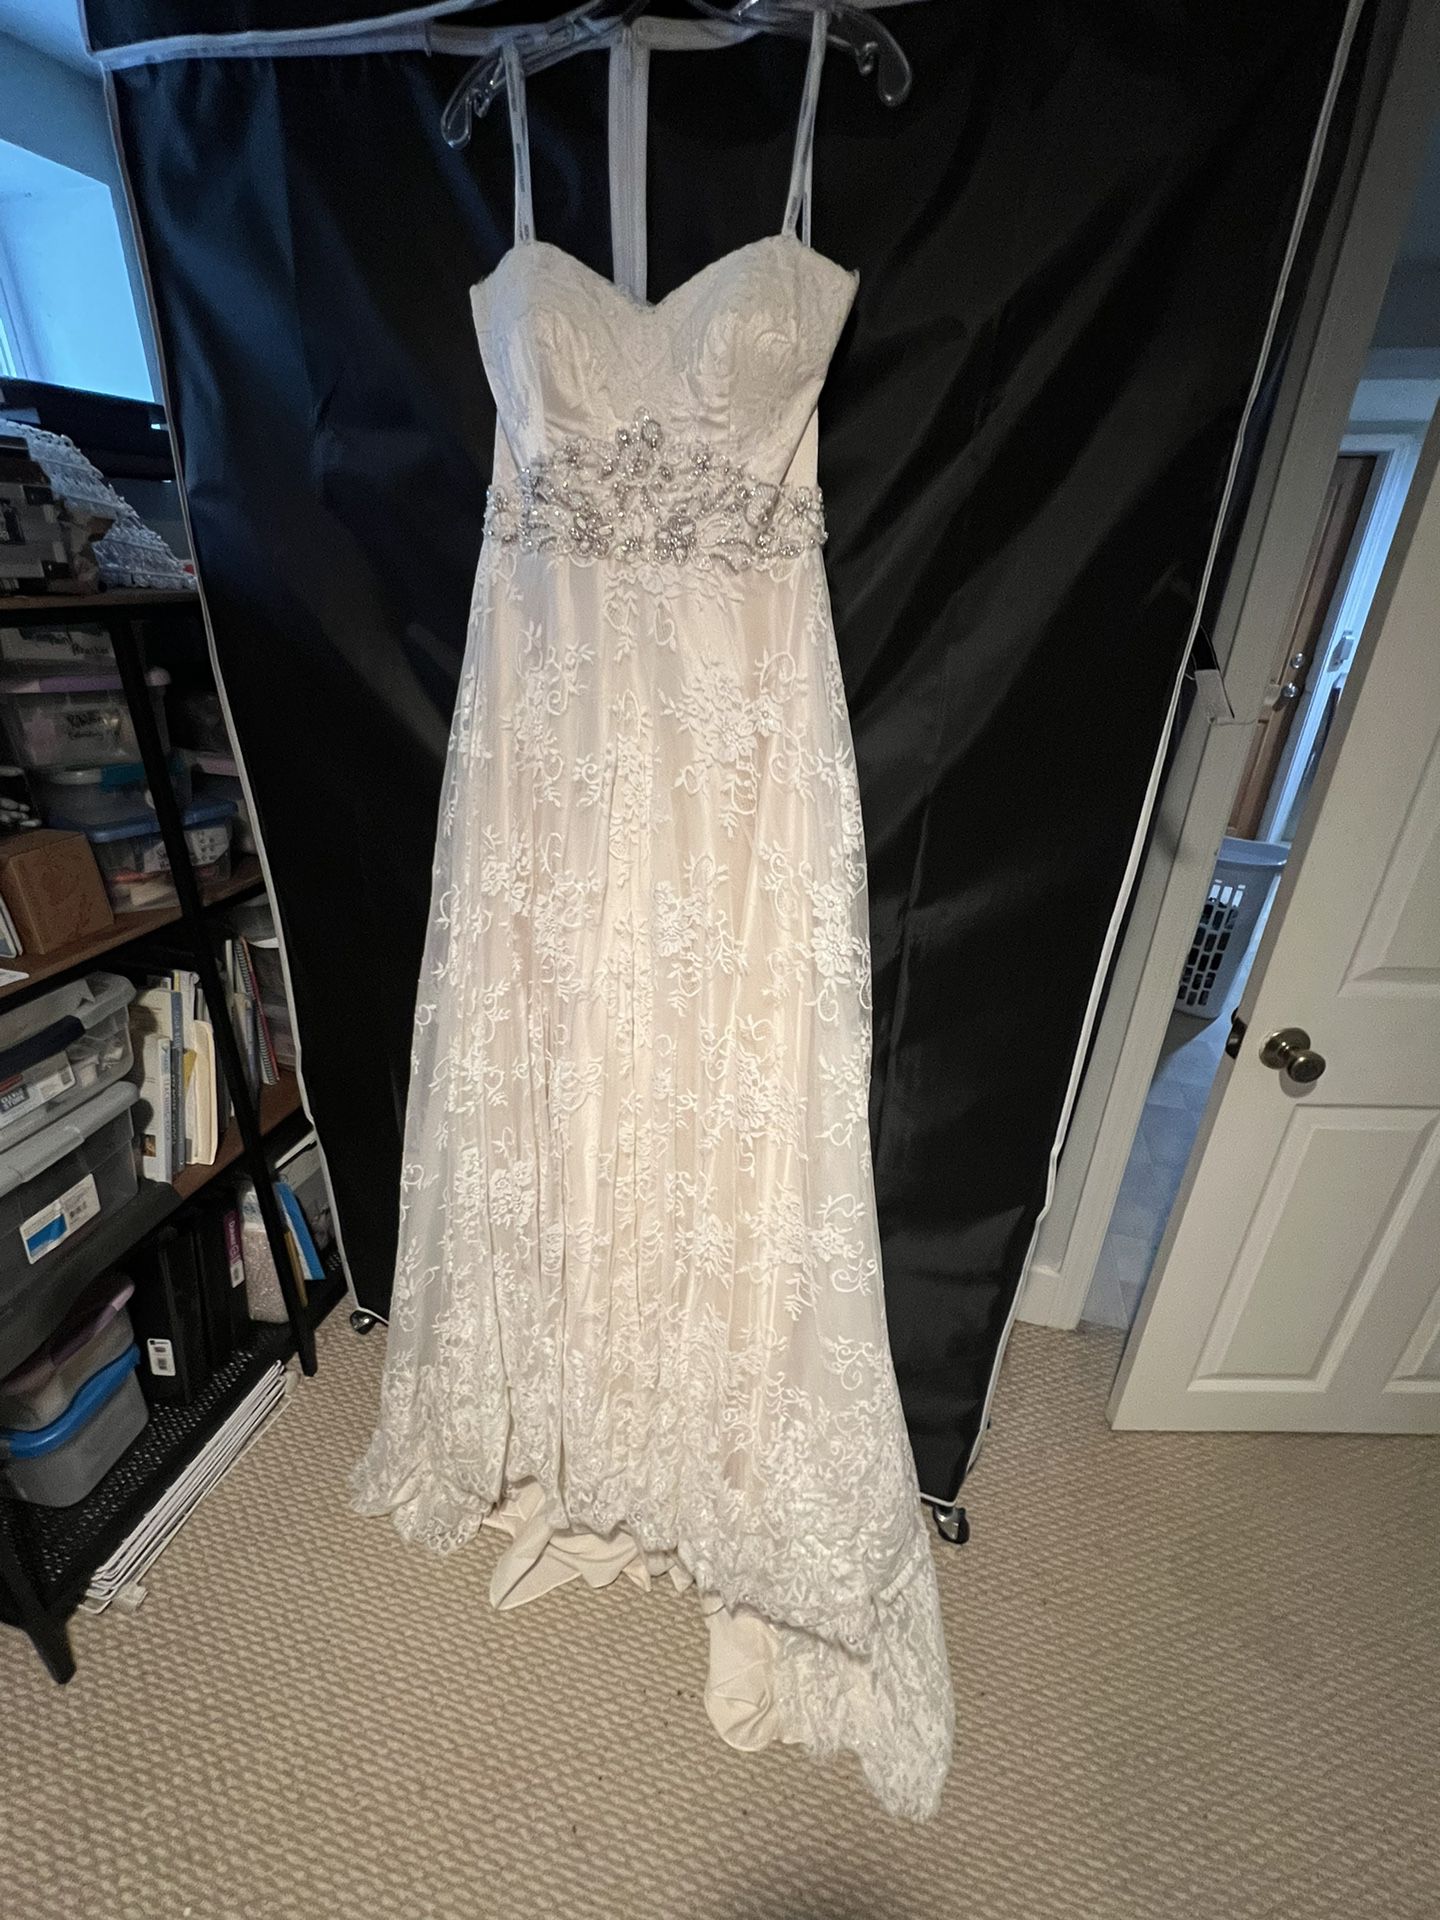 Justin  Alexander  Wedding Dress New With Tags